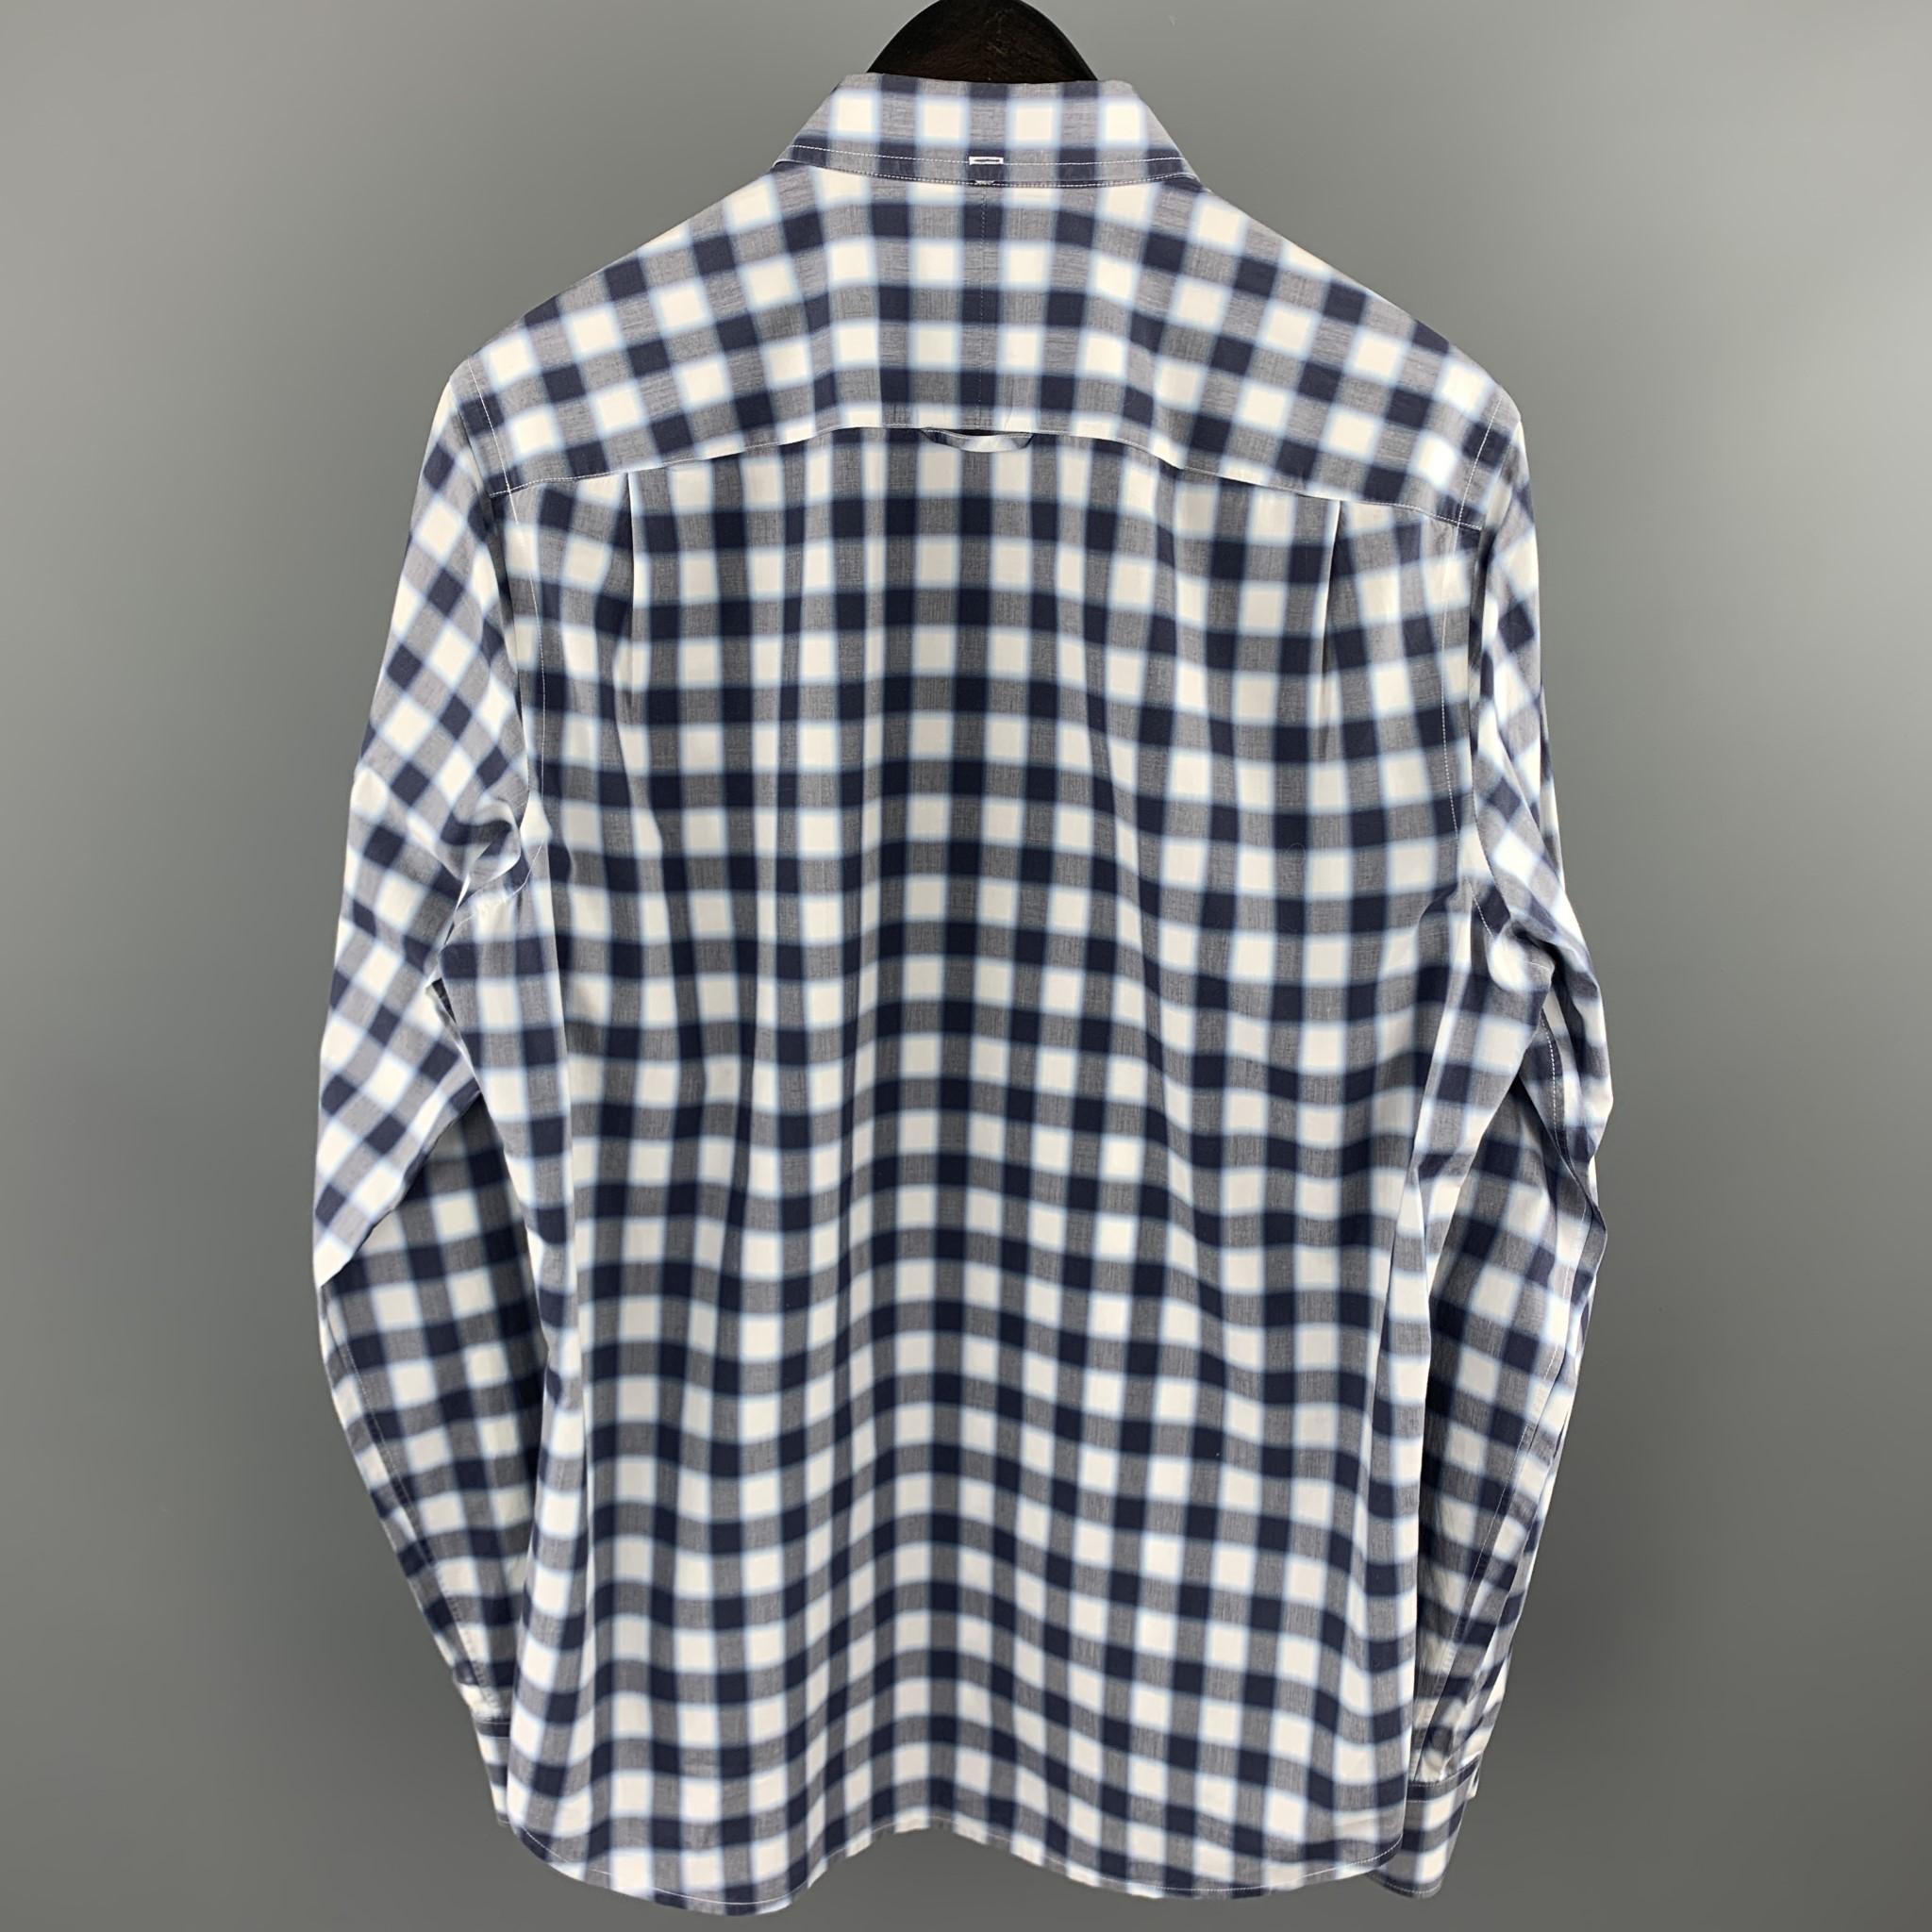 VINCE long sleeve shirt comes in a navy & gray plaid cotton featuring a button down style, contrast stitching, and a front patch pocket. 

Excellent Pre-Owned Condition.
Marked: M

Measurements:

Shoulder: 16 in. 
Chest: 41 in. 
Sleeve: 26.5 in.